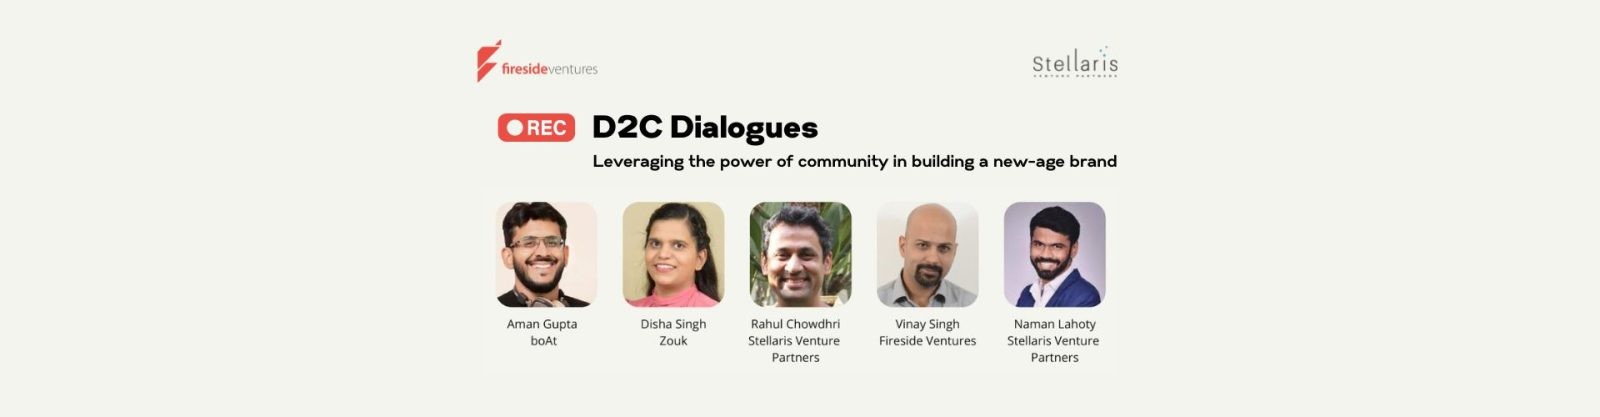 D2C Dialogues #8: Leveraging the power of community in building a new-age brand